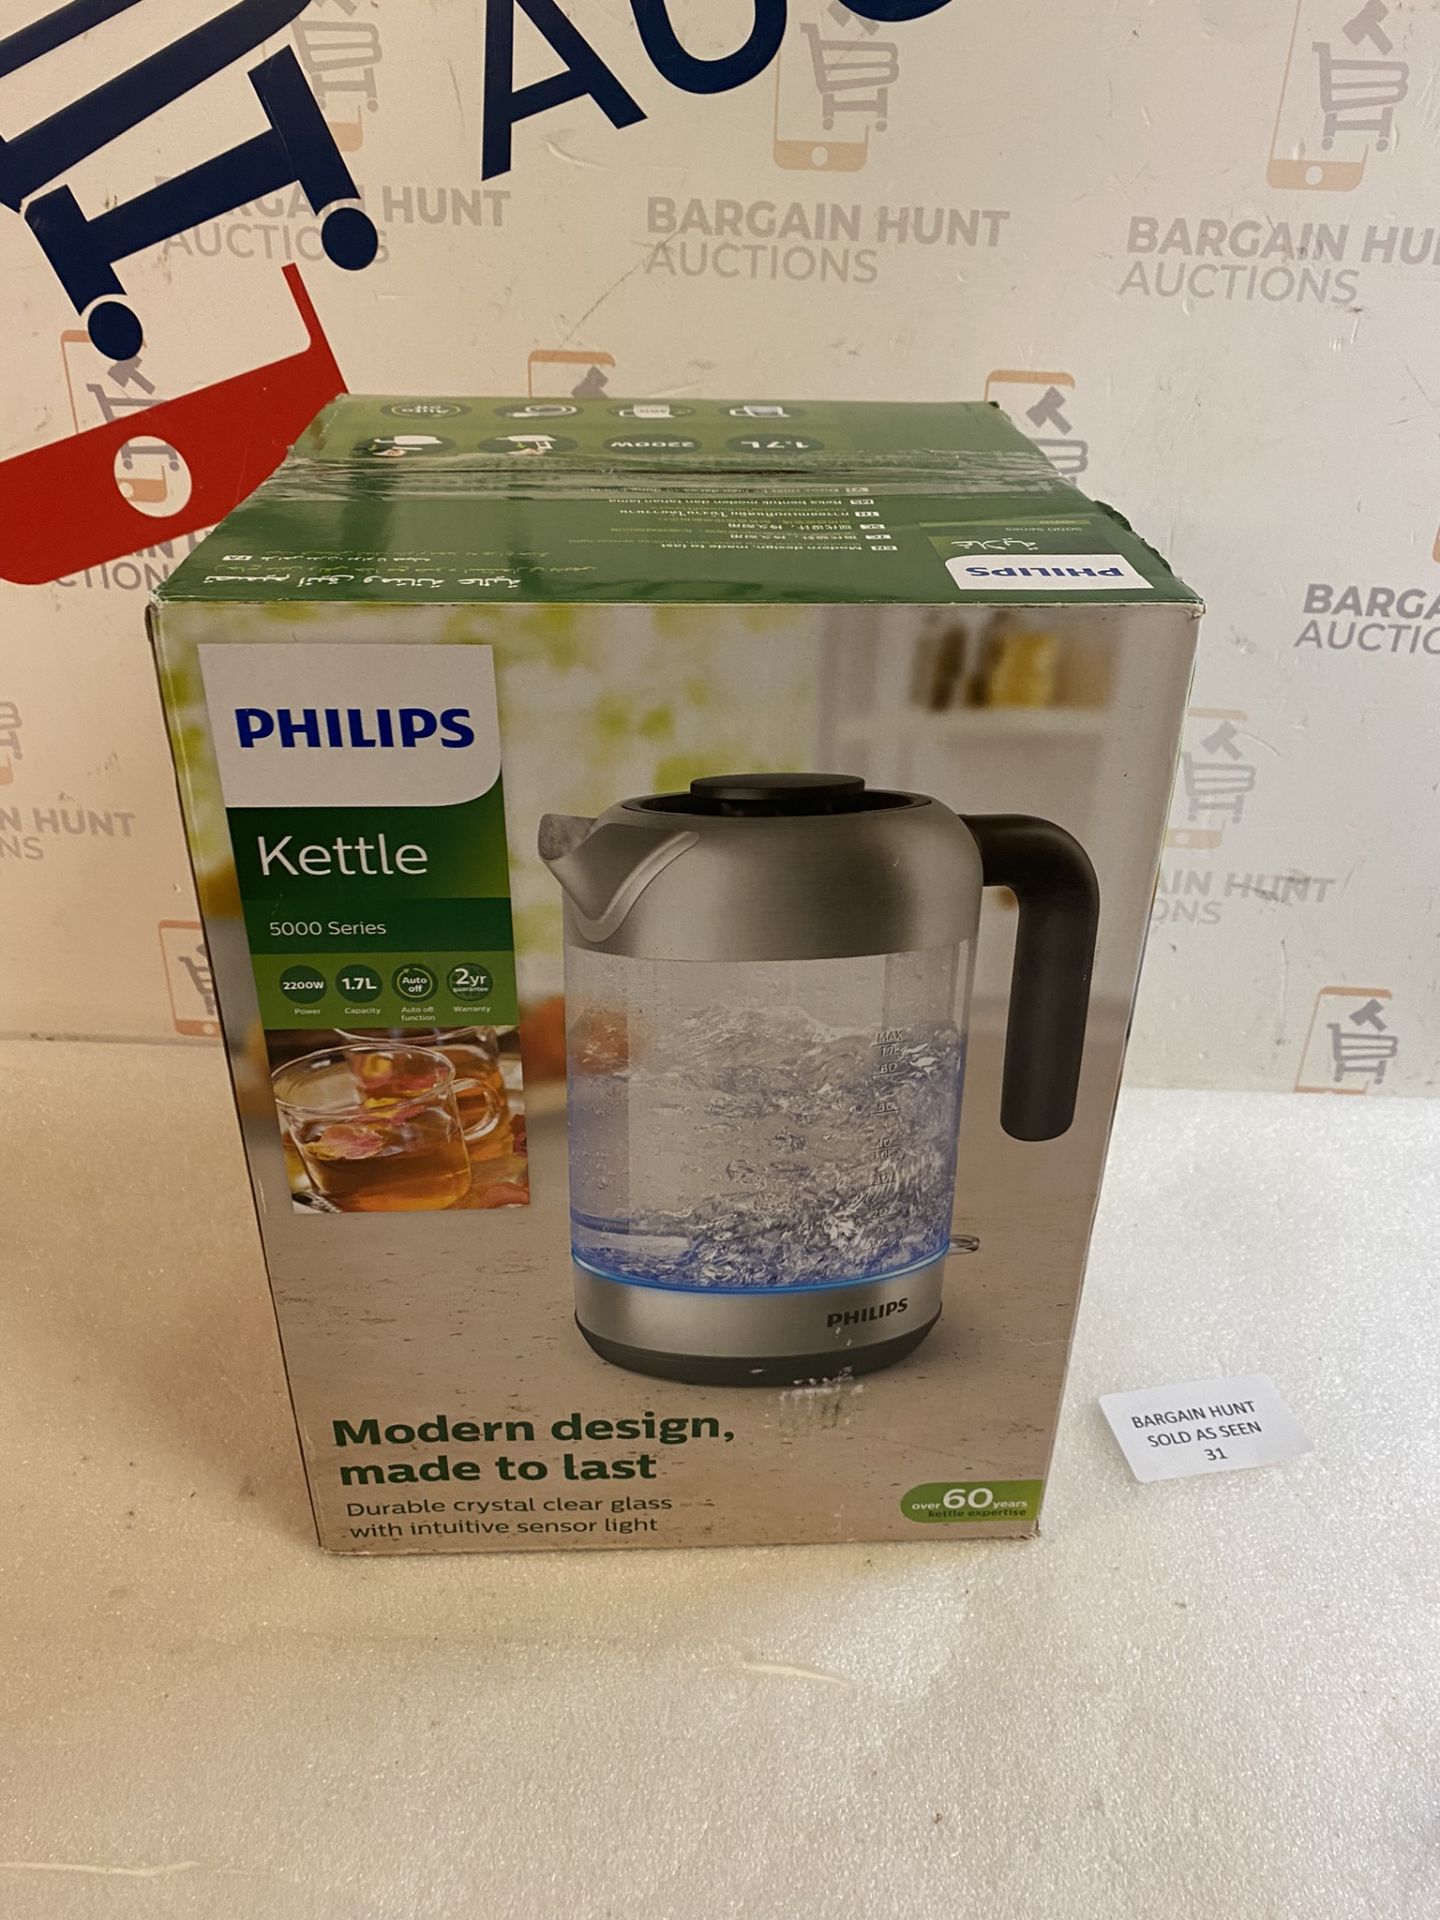 Philips Electric Kettle - HD9339/81 1.7L Glass Kettle RRP £58.99 - Image 2 of 2